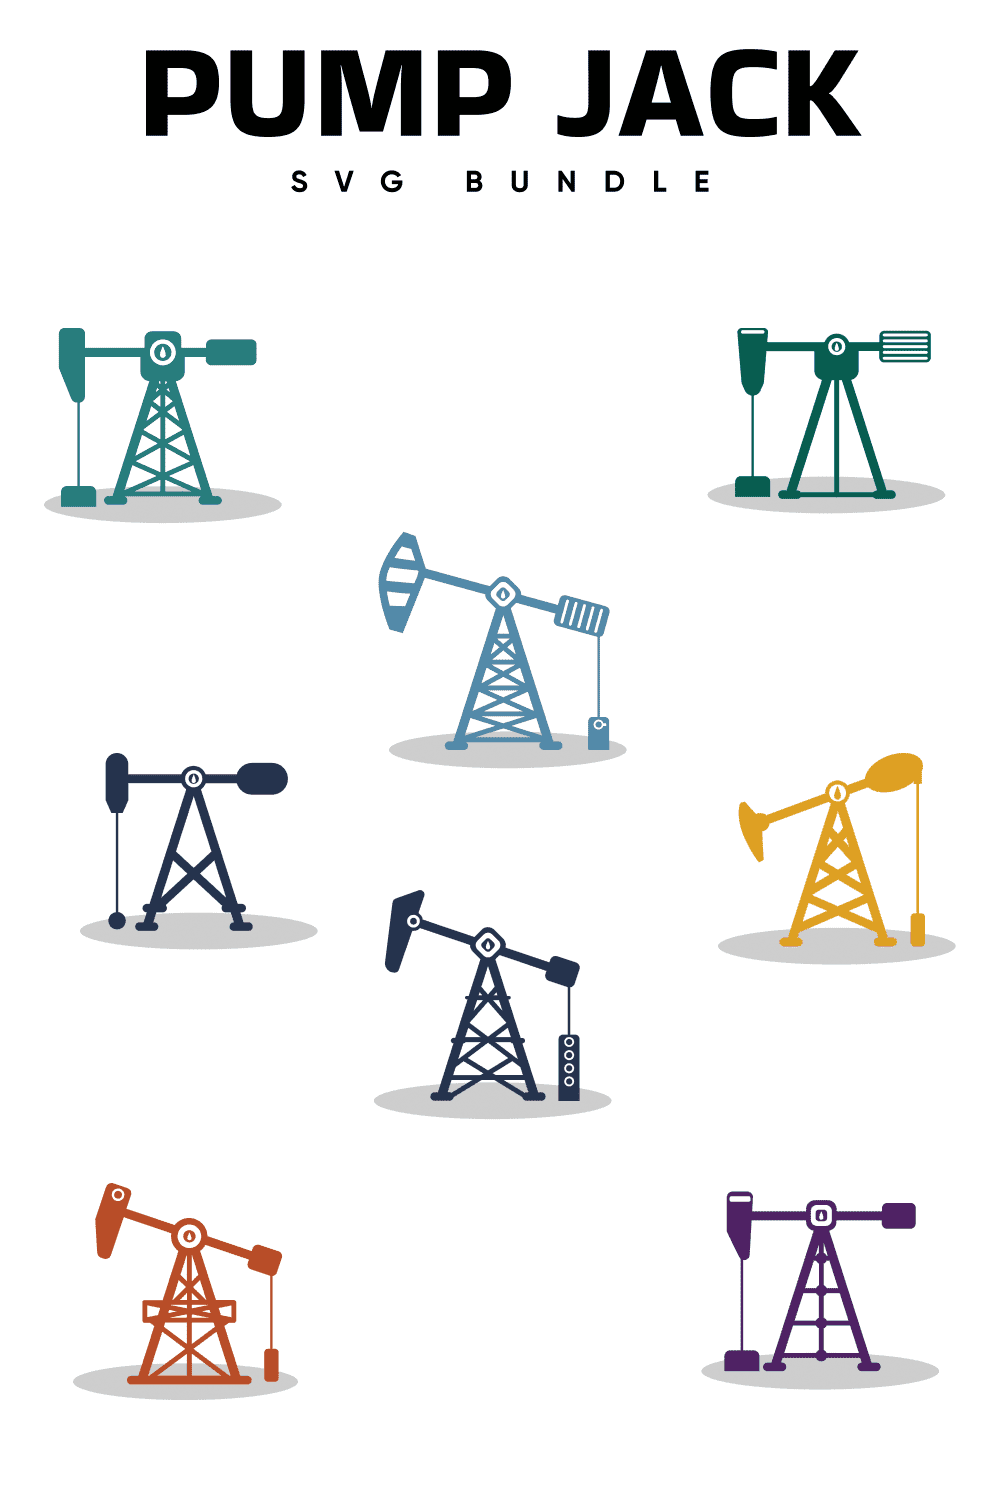 The pump jack is shown in different colors.